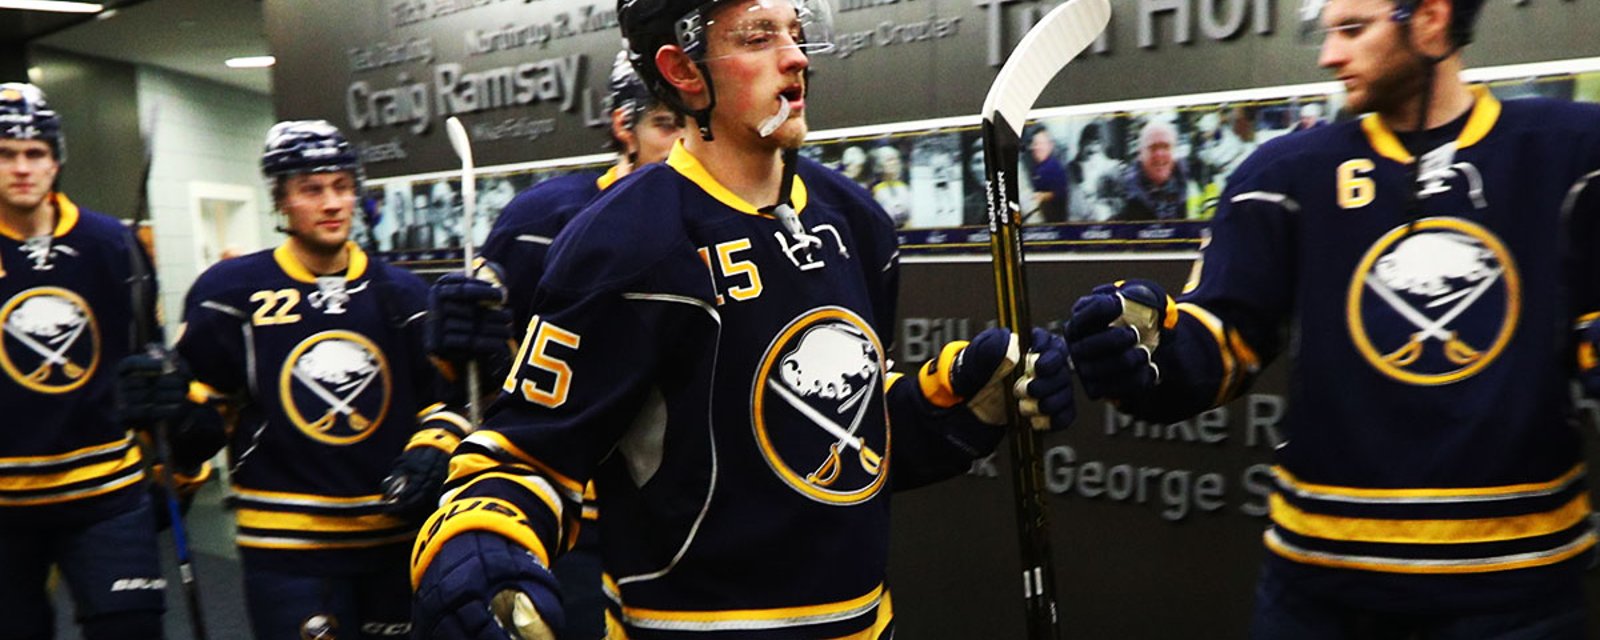 Jack Eichel's reaction to team loss is amazing.